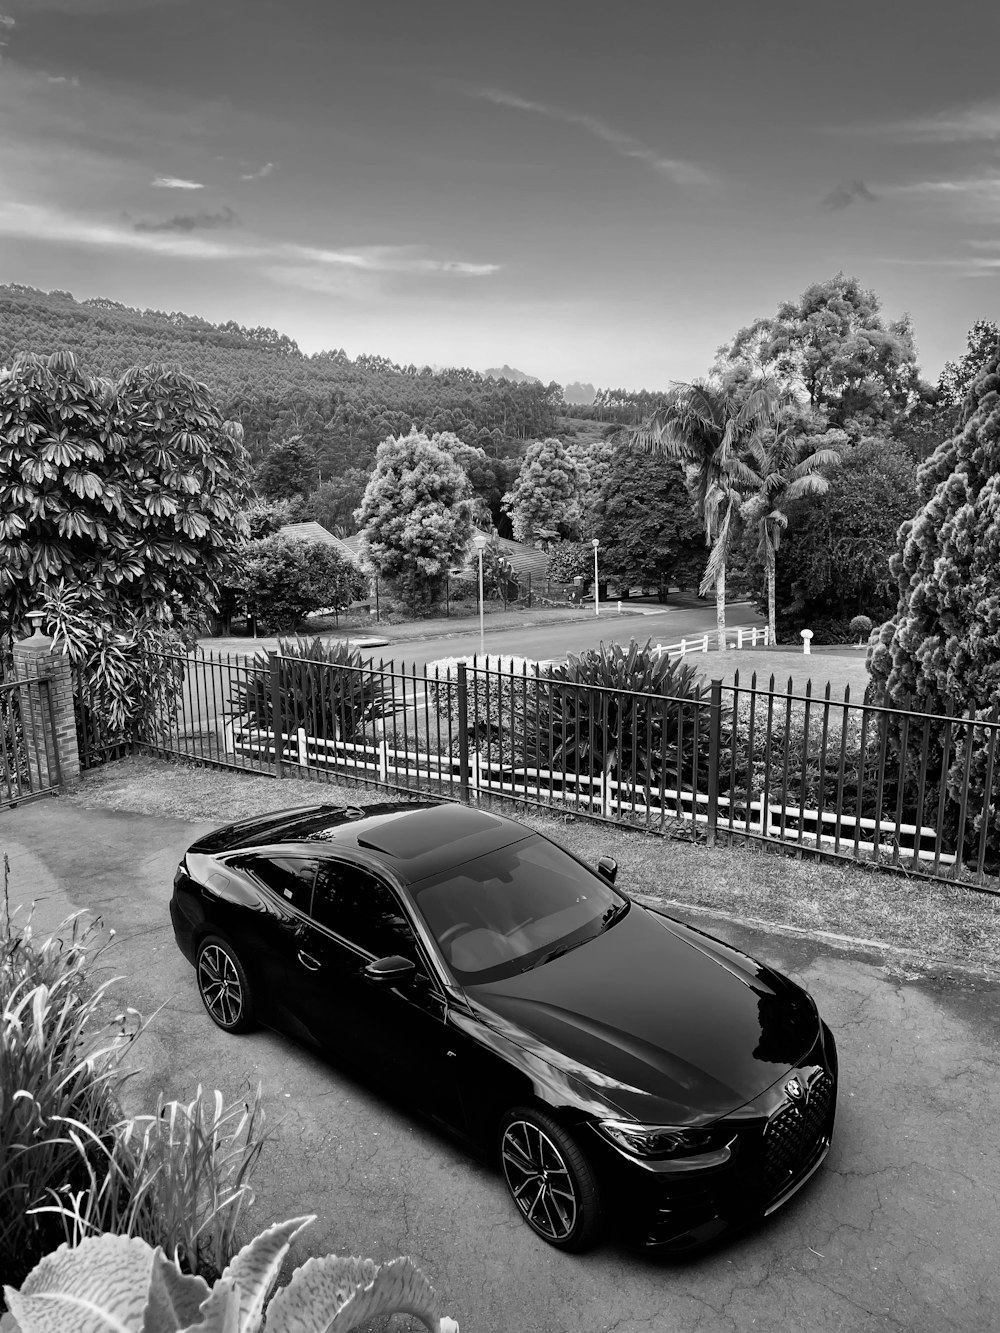 a black car parked in a driveway next to a fence